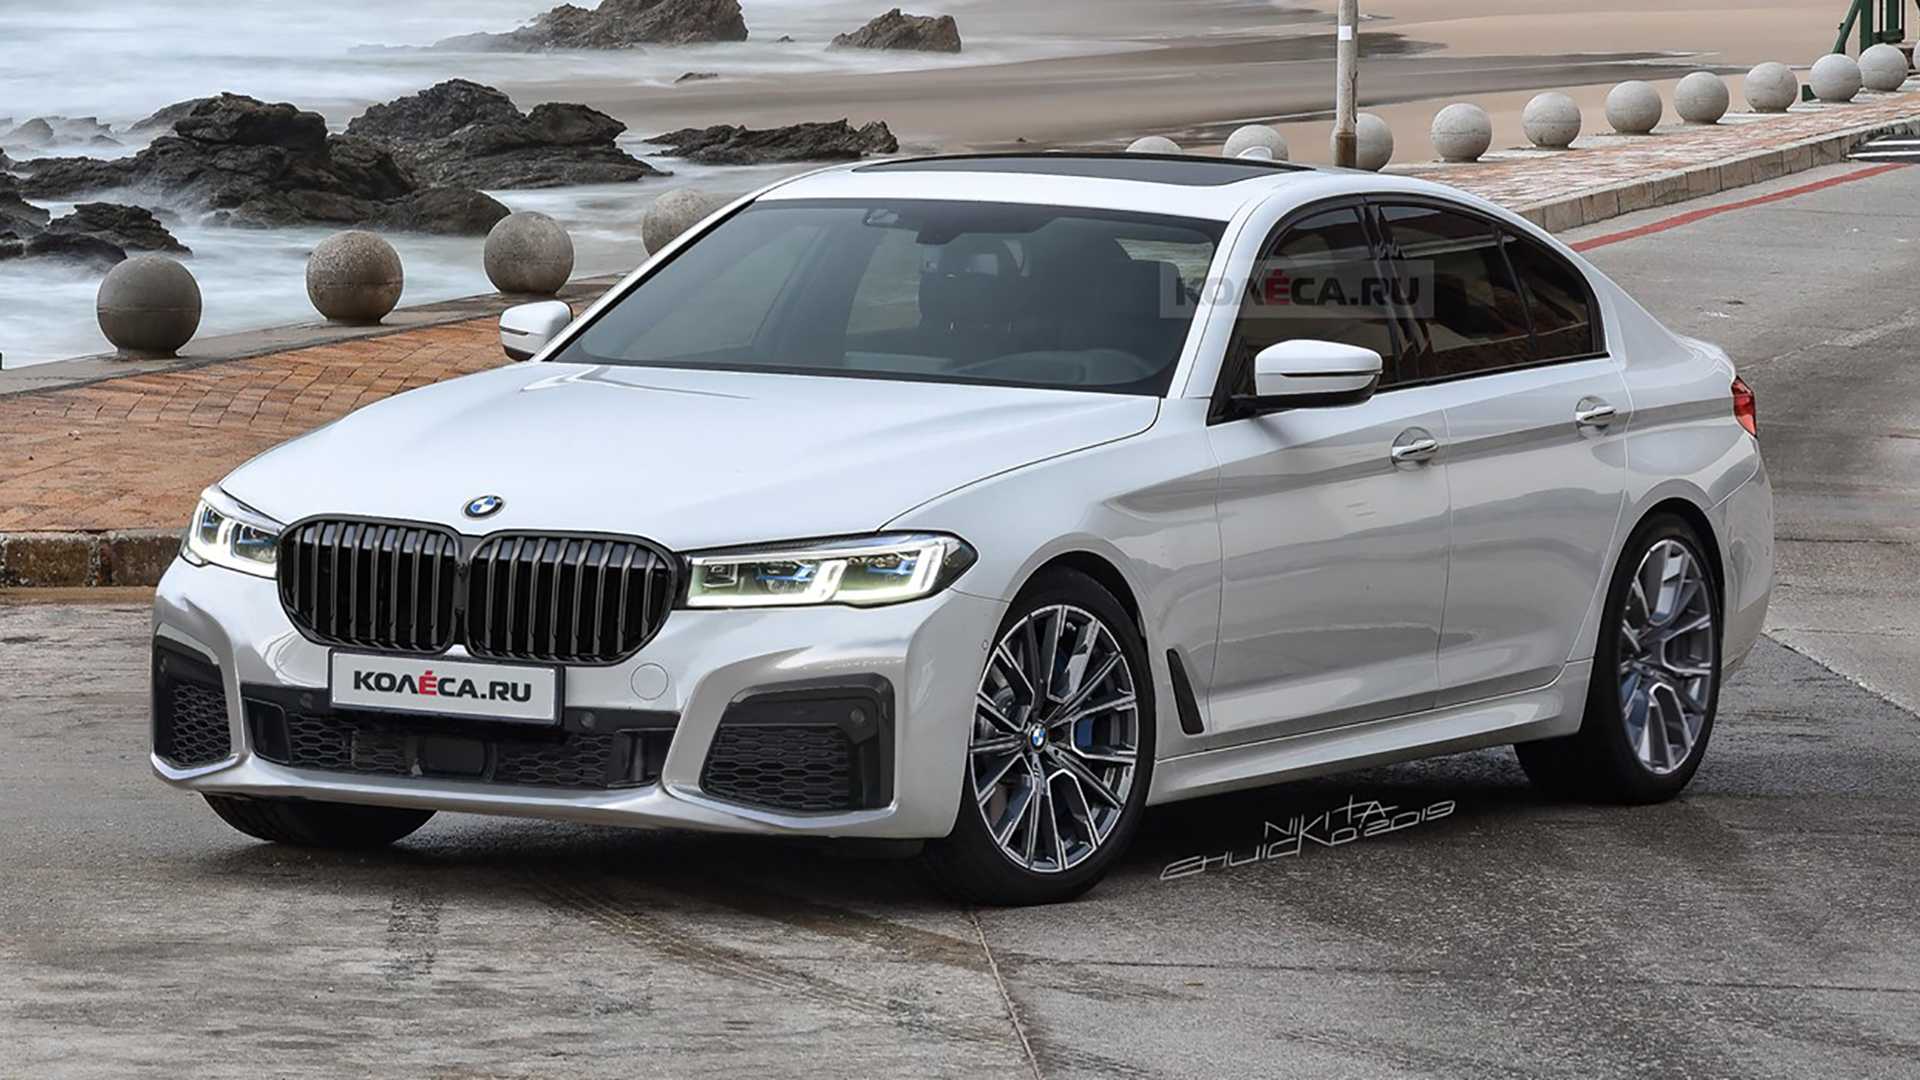 2021 BMW 5 Series LCI Rendered, Comes With Huge Grille - autoevolution